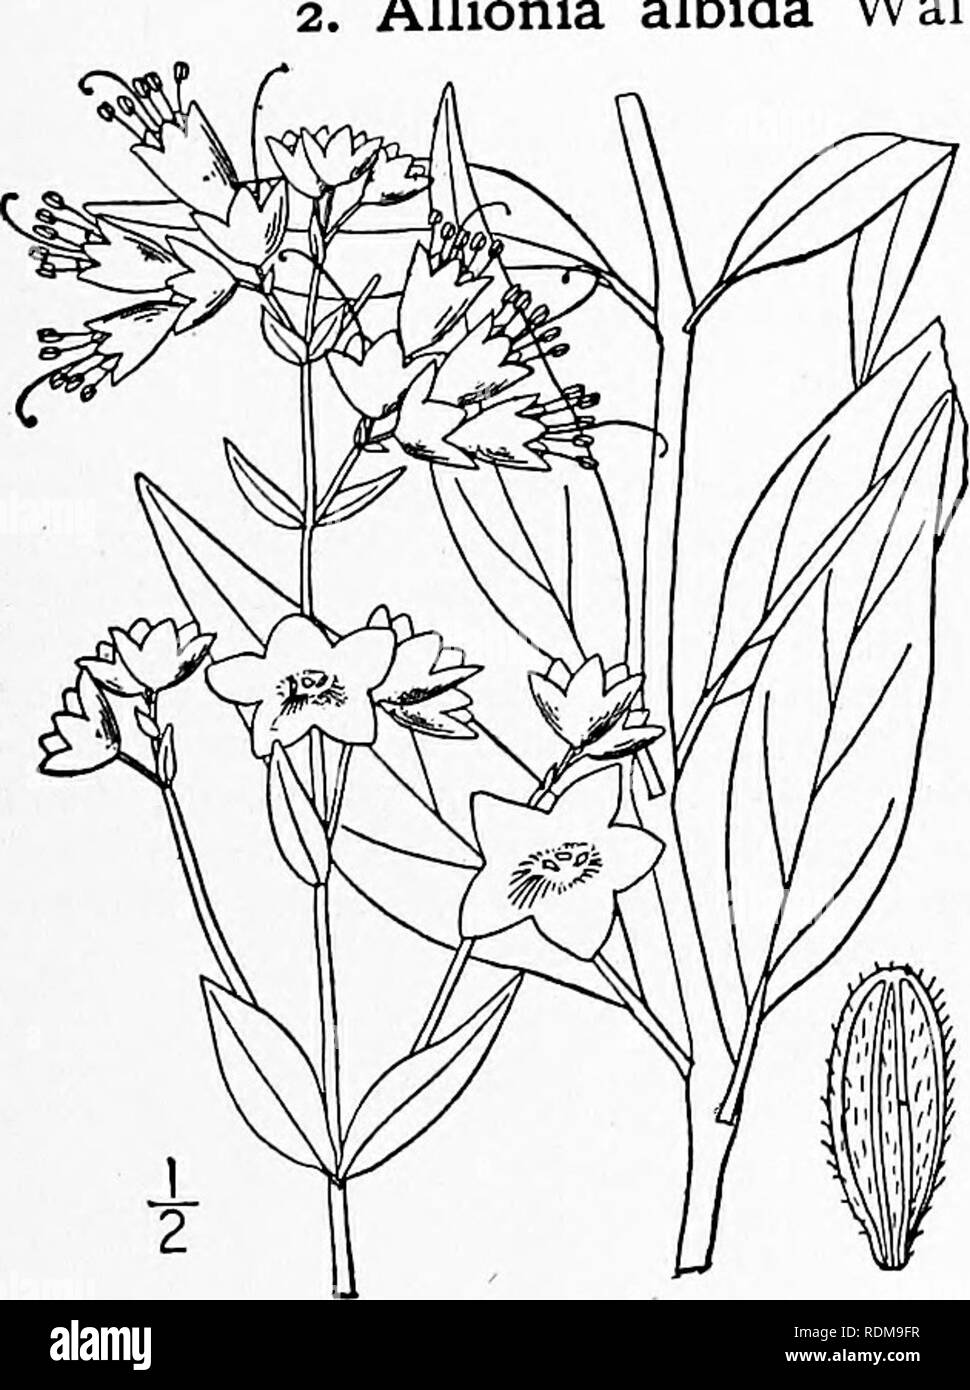 . An illustrated flora of the northern United States, Canada and the British possessions, from Newfoundland to the parallel of the southern boundary of Virginia, and from the Atlantic Ocean westward to the 102d meridian. Botany; Botany. Allionia glabra (S. Wats.) Kuntze, of the Southwest, differing in has recently been collected in western Kansas being Allionia albida Walt. Pale Umbrella-wort. Fig. glabrous throughout, 1727. Allionia albida Walt. Fl. Car. 84. 1788. Oxybaphus albidiis Choisy in DC. Prodr. 13: Part 2, 434. 1849. A. bracteata Rydb. Bull. Torn Club 29: 690. 1902. A. lanceolata Ryd Stock Photo